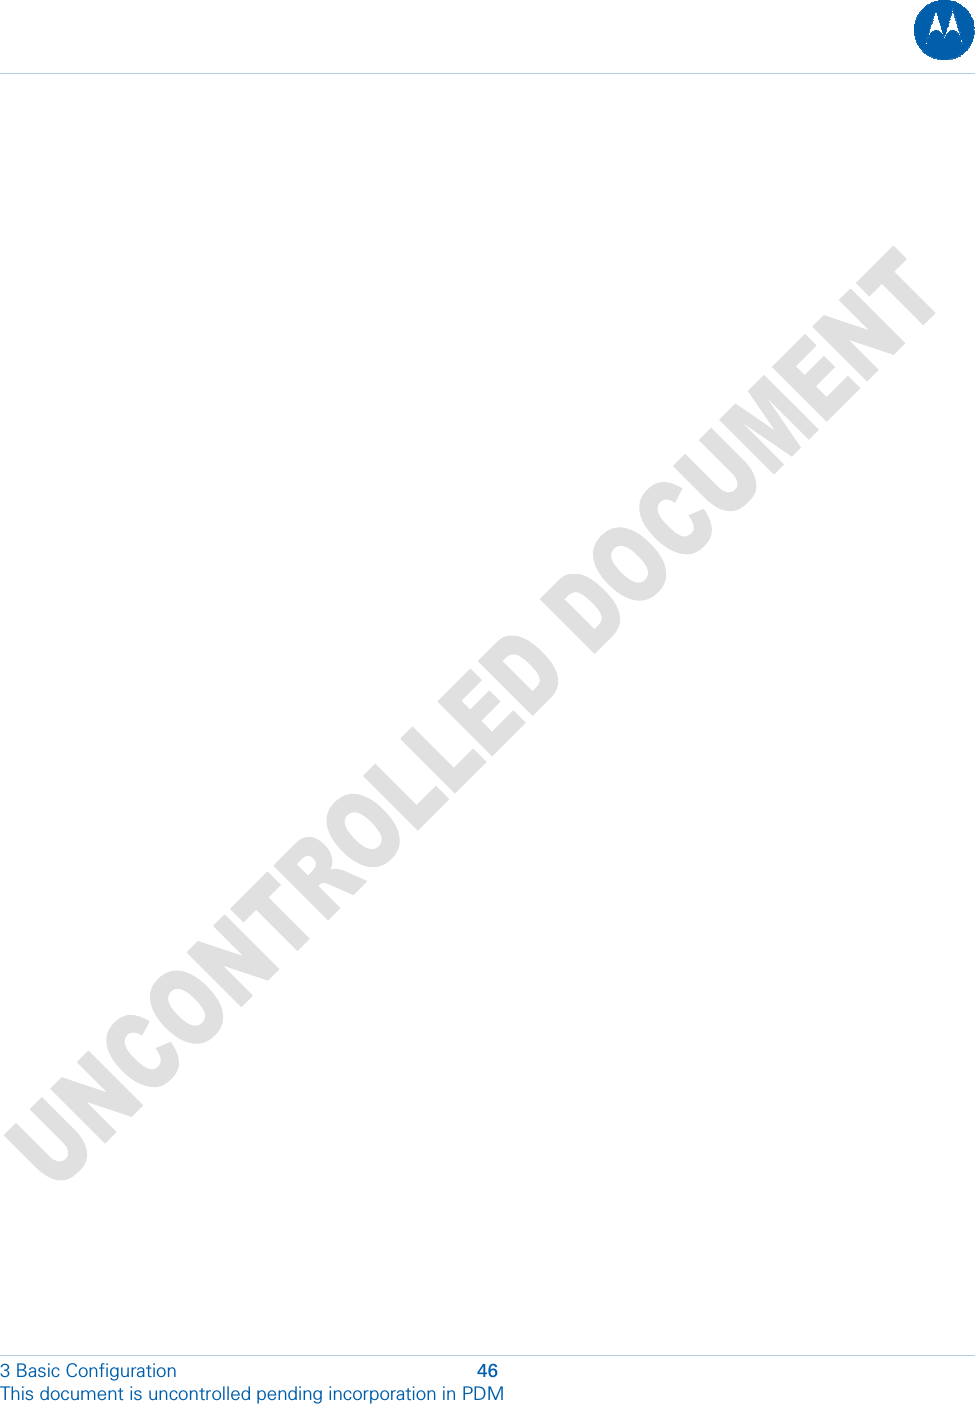  3 Basic Configuration  46 This document is uncontrolled pending incorporation in PDM  